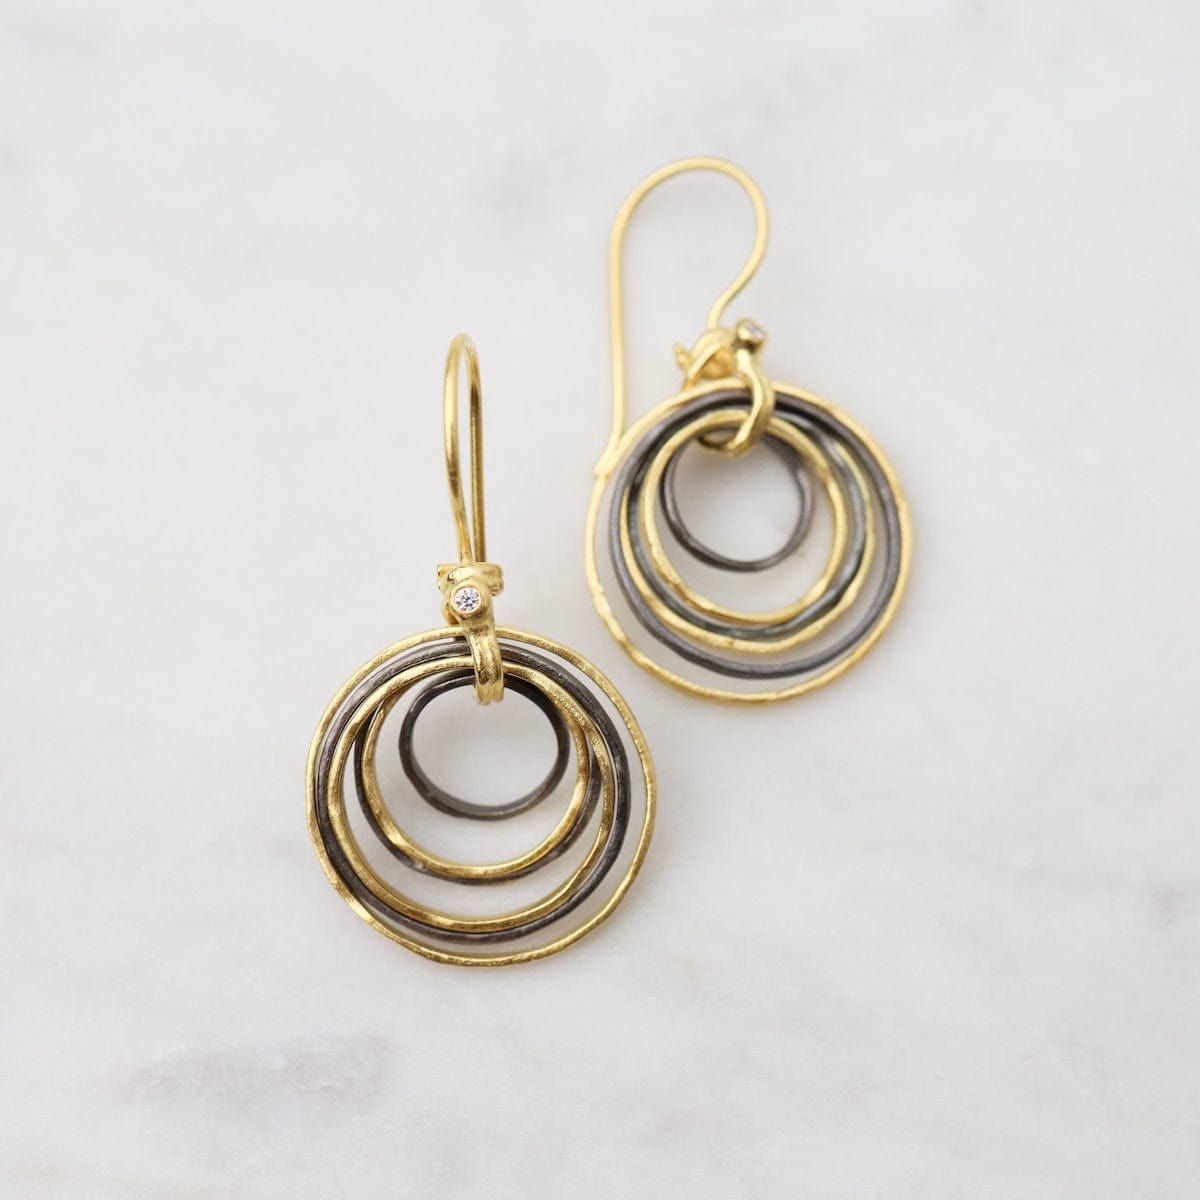 EAR-GPL Two Tone Earrings with 7 Hammered Rings